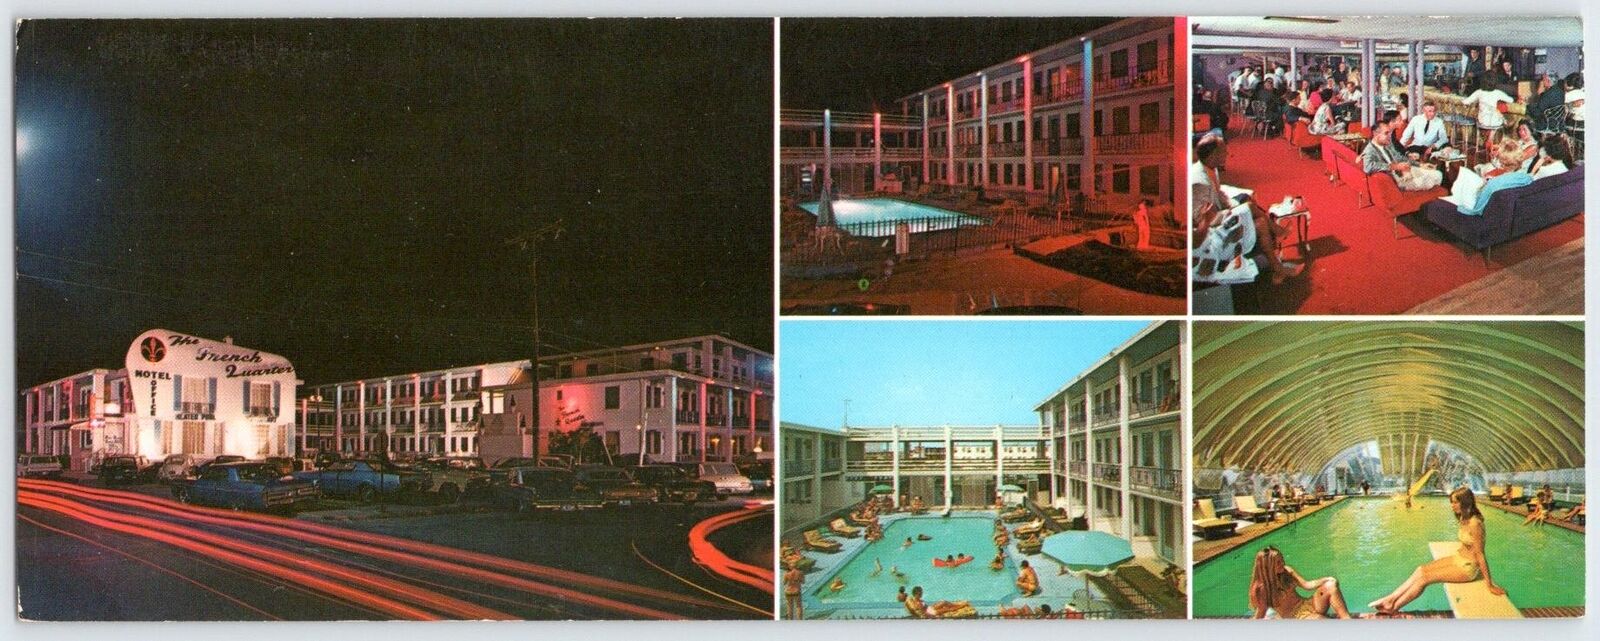 1970s OCEAN CITY MD FRENCH QUARTER MOTEL APARTMENTS 22nd ST PANORAMIC POSTCARD